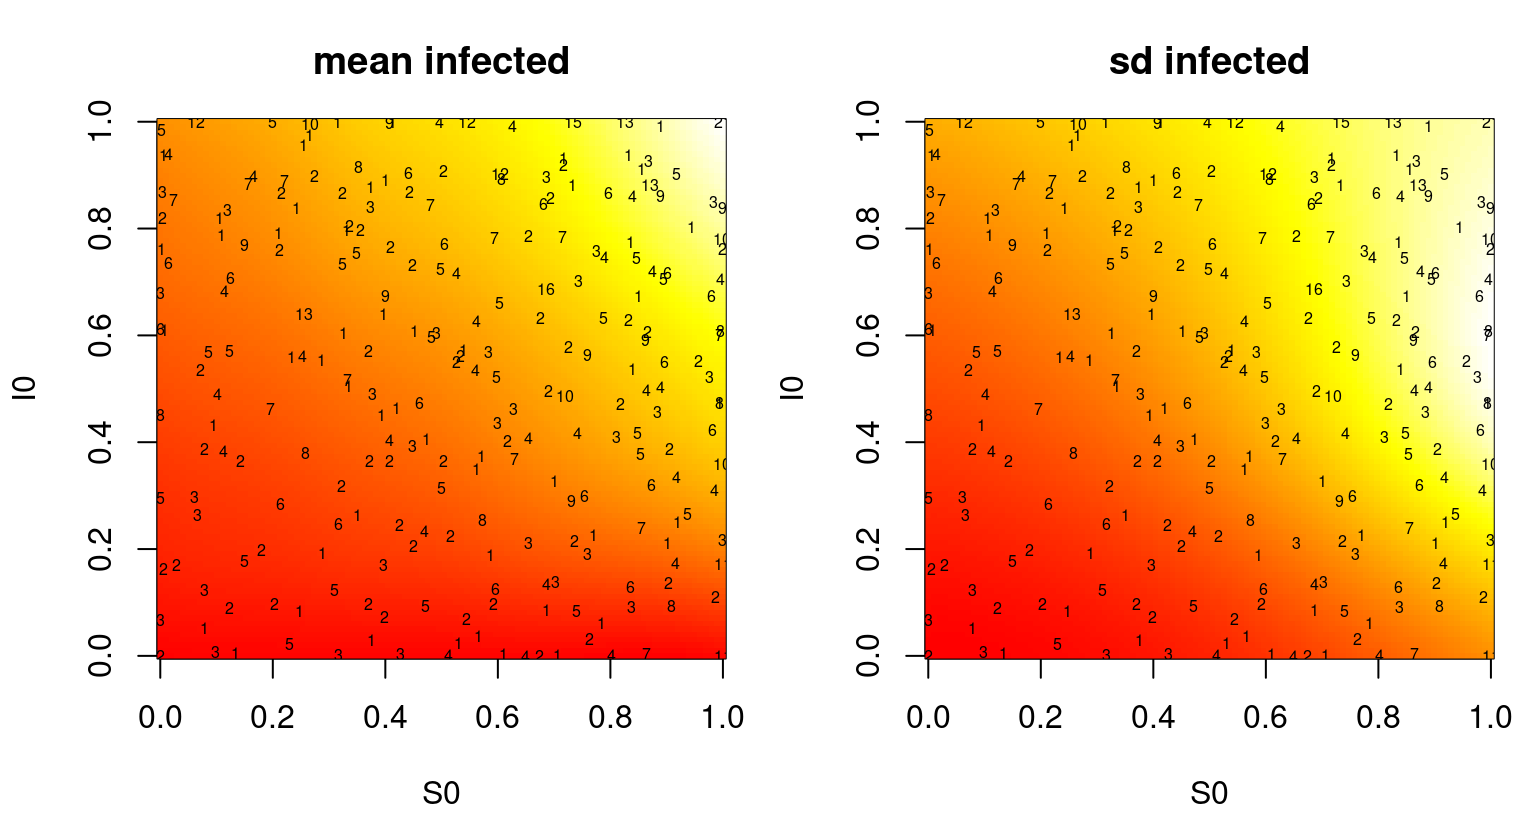 Heteroskedastic GP fit to sequentially designed SIR data showing predictive mean surface (left) and estimated standard deviation (right). Compare to batch analog in Figure 10.4.